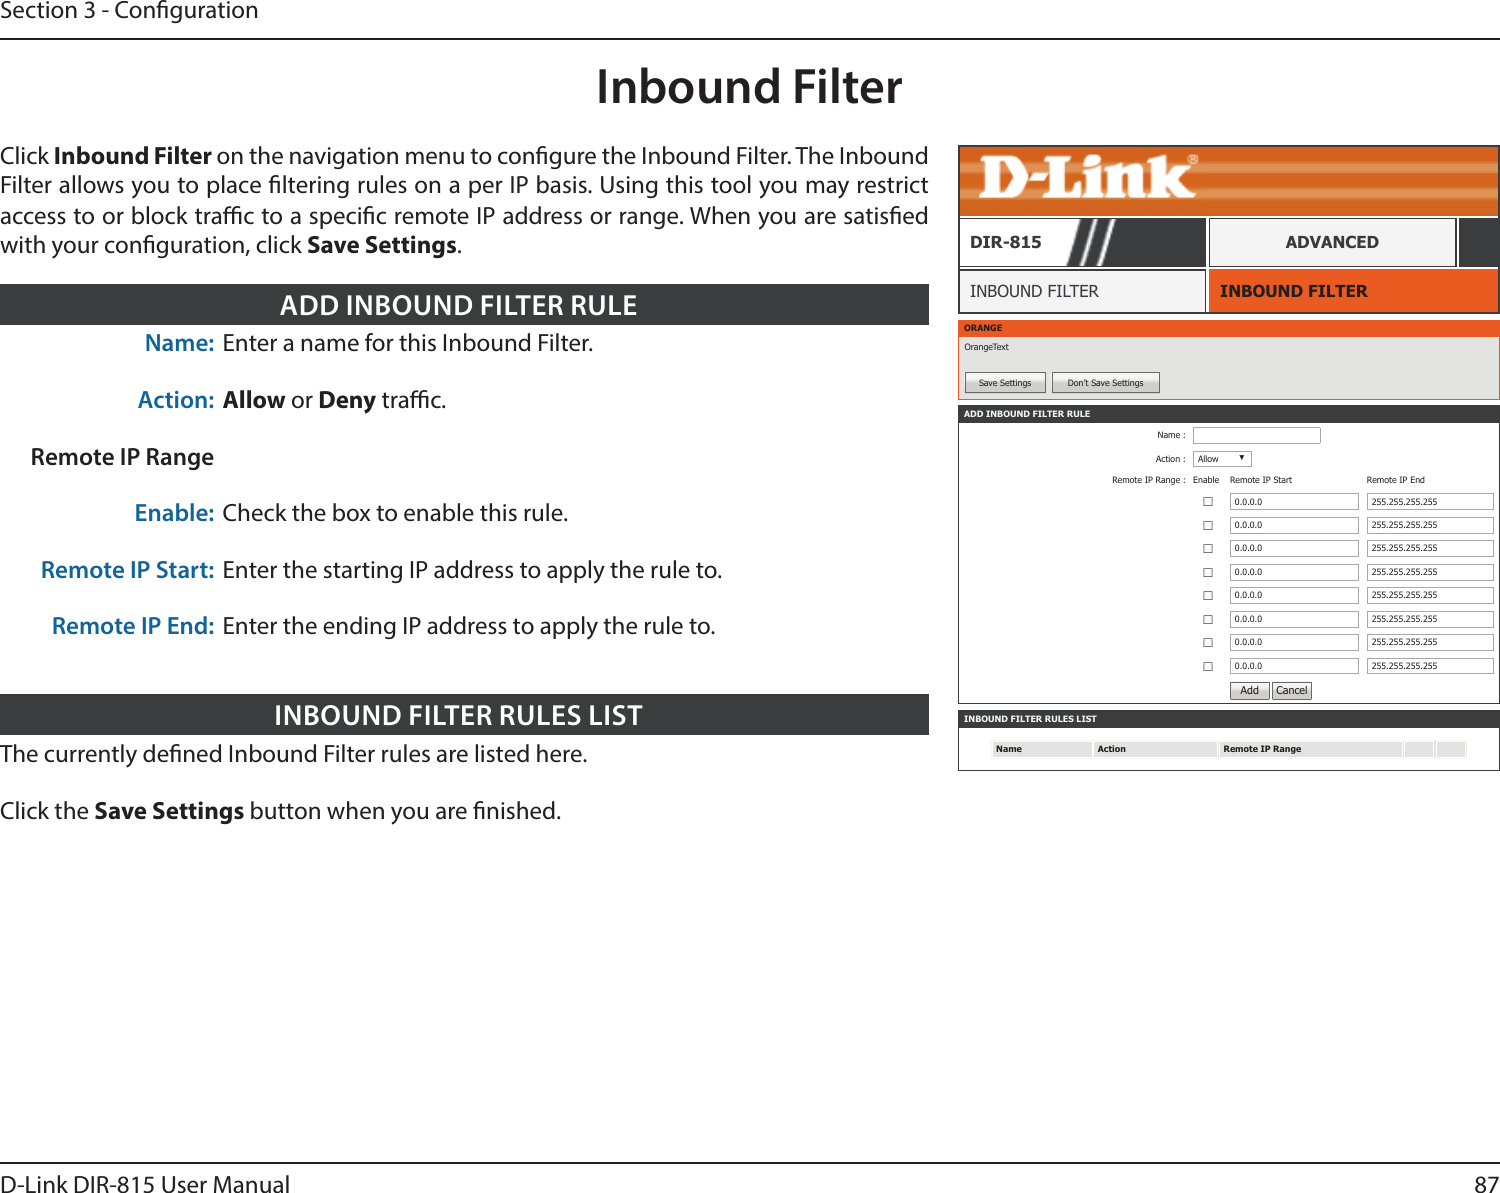 87D-Link DIR-815 User ManualSection 3 - CongurationInbound FilterINBOUND FILTERINBOUND FILTERDIR-815 ADVANCEDClick Inbound Filter on the navigation menu to congure the Inbound Filter. The Inbound Filter allows you to place ltering rules on a per IP basis. Using this tool you may restrict access to or block trac to a specic remote IP address or range. When you are satised with your conguration, click Save Settings.ORANGEOrangeTextSave Settings Don’t Save SettingsINBOUND FILTER RULES LISTName Action Remote IP RangeADD INBOUND FILTER RULEName :Action : Allow ▼Remote IP Range : Enable  Remote IP Start Remote IP End ☐0.0.0.0 255.255.255.255☐0.0.0.0 255.255.255.255☐0.0.0.0 255.255.255.255☐0.0.0.0 255.255.255.255☐0.0.0.0 255.255.255.255☐0.0.0.0 255.255.255.255☐0.0.0.0 255.255.255.255☐0.0.0.0 255.255.255.255Add  CancelThe currently dened Inbound Filter rules are listed here.Click the Save Settings button when you are nished.INBOUND FILTER RULES LISTName: Enter a name for this Inbound Filter.Action: Allow or Deny trac. Remote IP RangeEnable: Check the box to enable this rule.Remote IP Start: Enter the starting IP address to apply the rule to.Remote IP End: Enter the ending IP address to apply the rule to.ADD INBOUND FILTER RULE